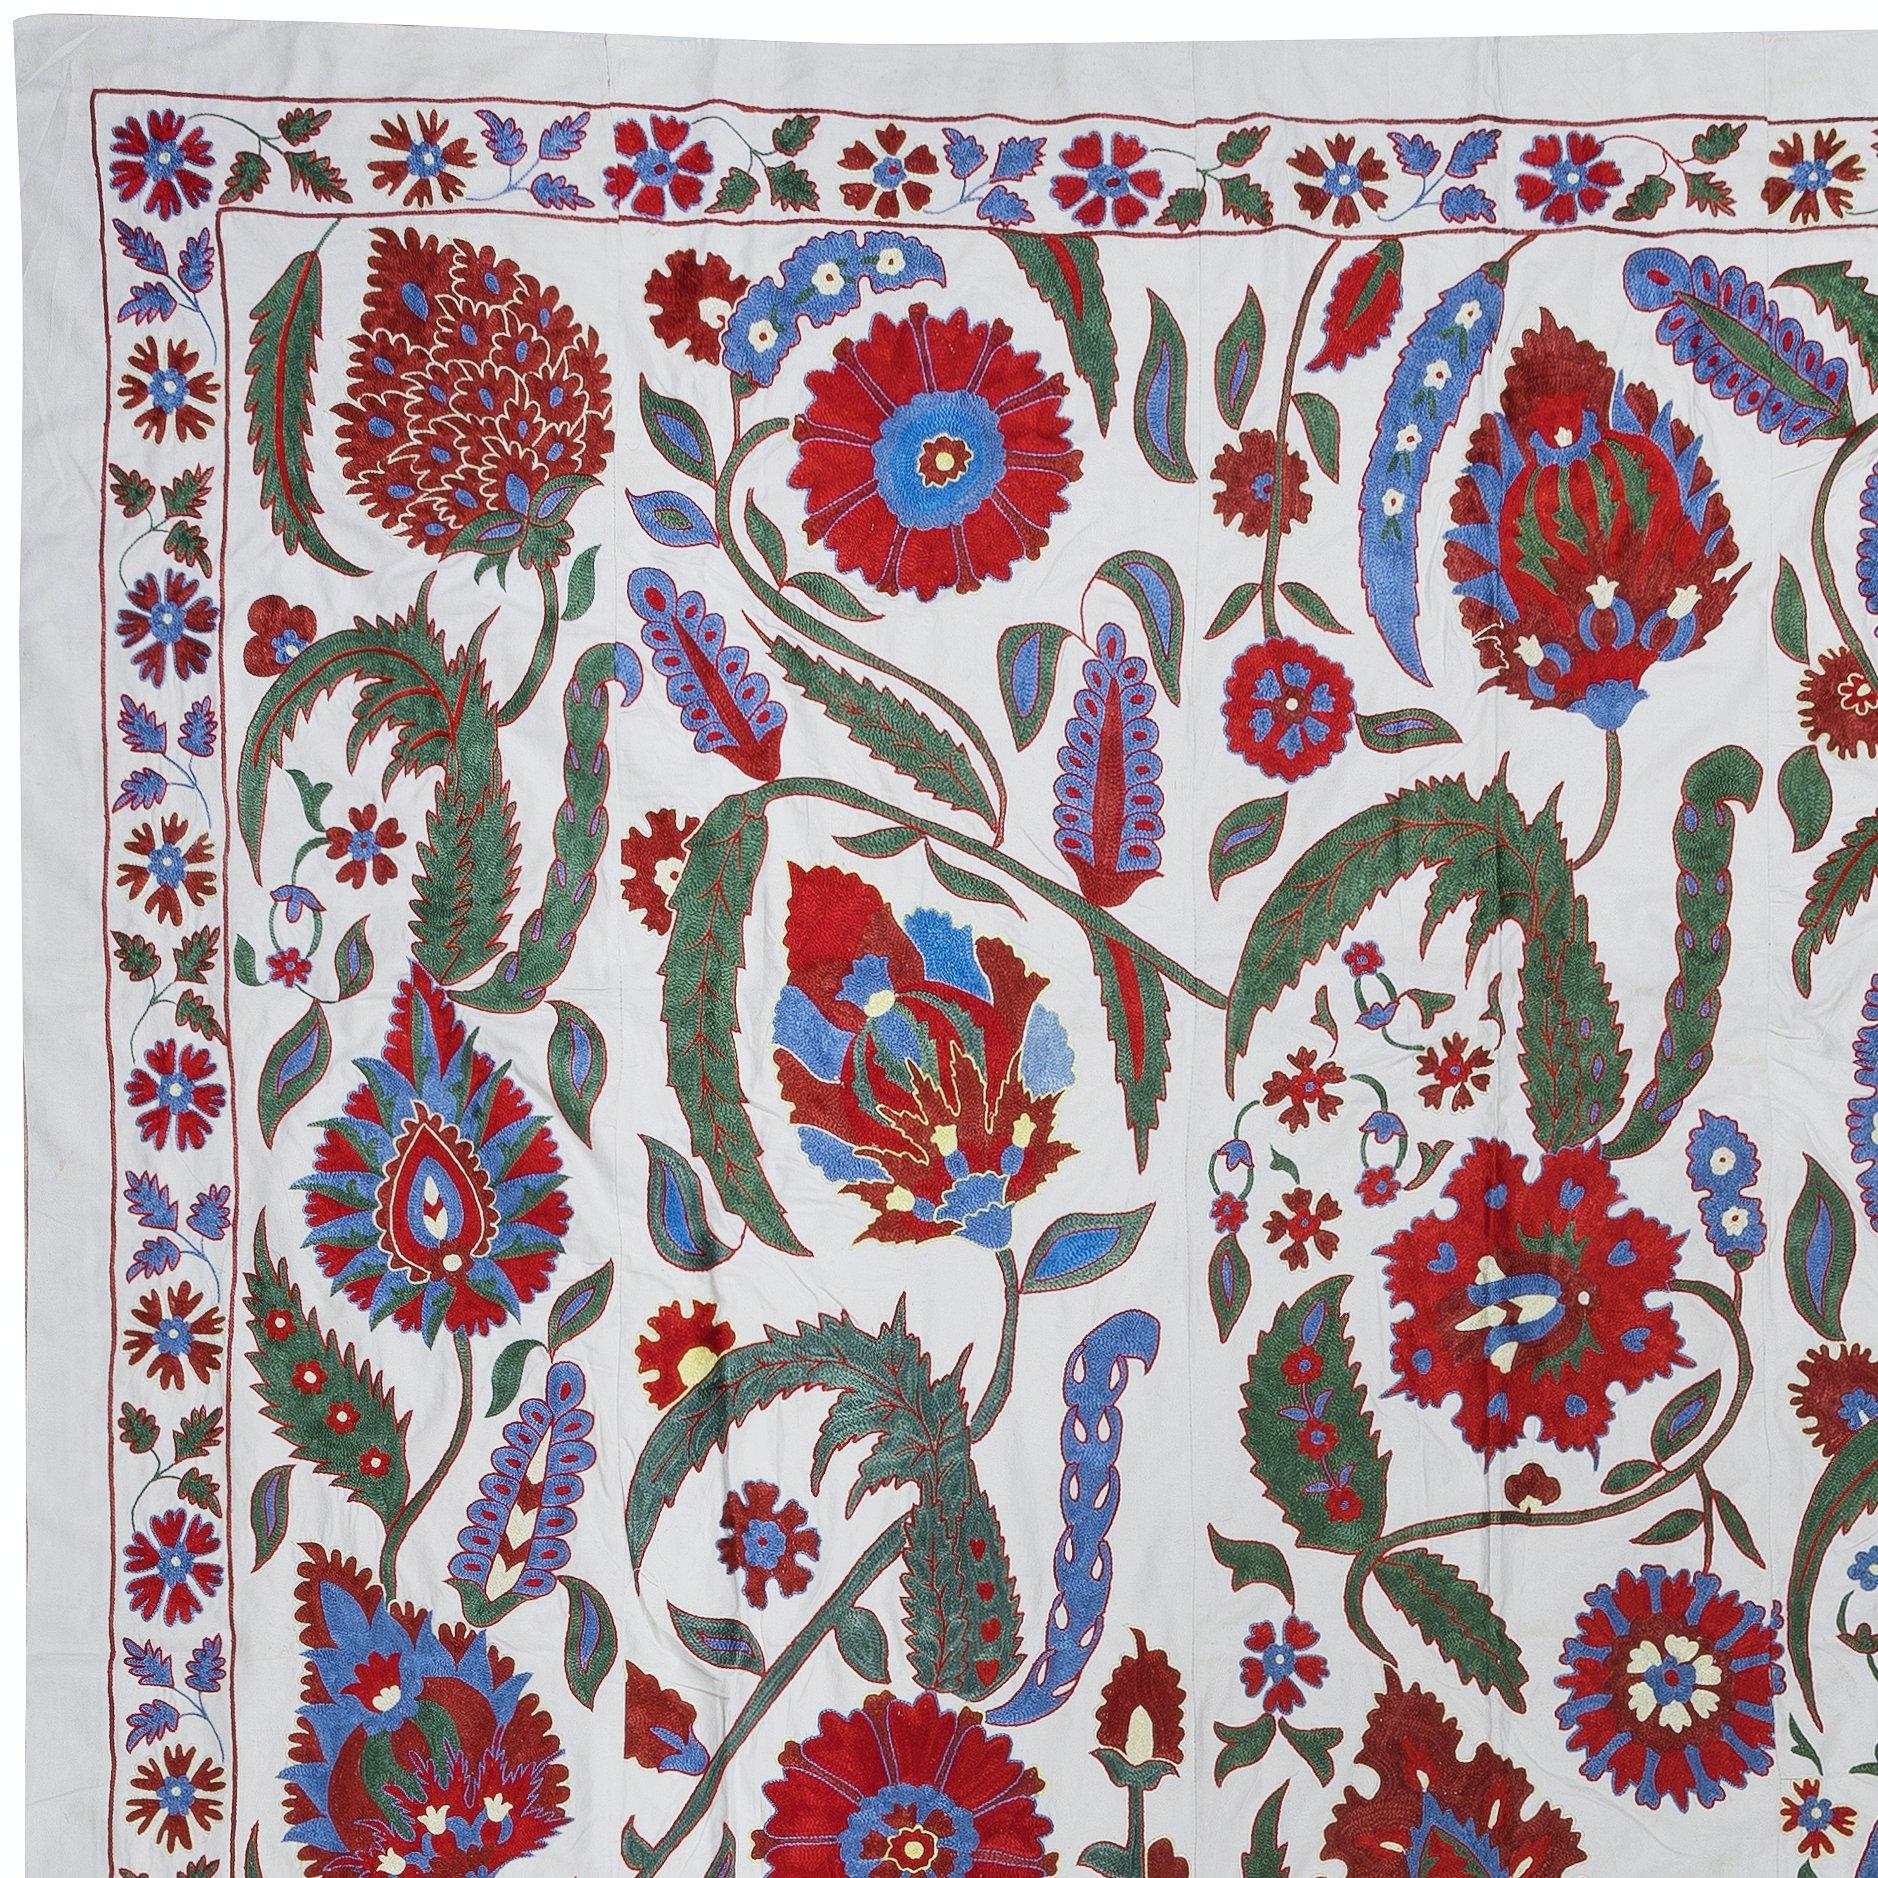 Introducing our exquisite new suzani hand embroidered wall hanging, a captivating piece that combines ancient craftsmanship with modern artistry. This embroidered cloth is not just a suzani throw, but a remarkable suzani wall hanging that will